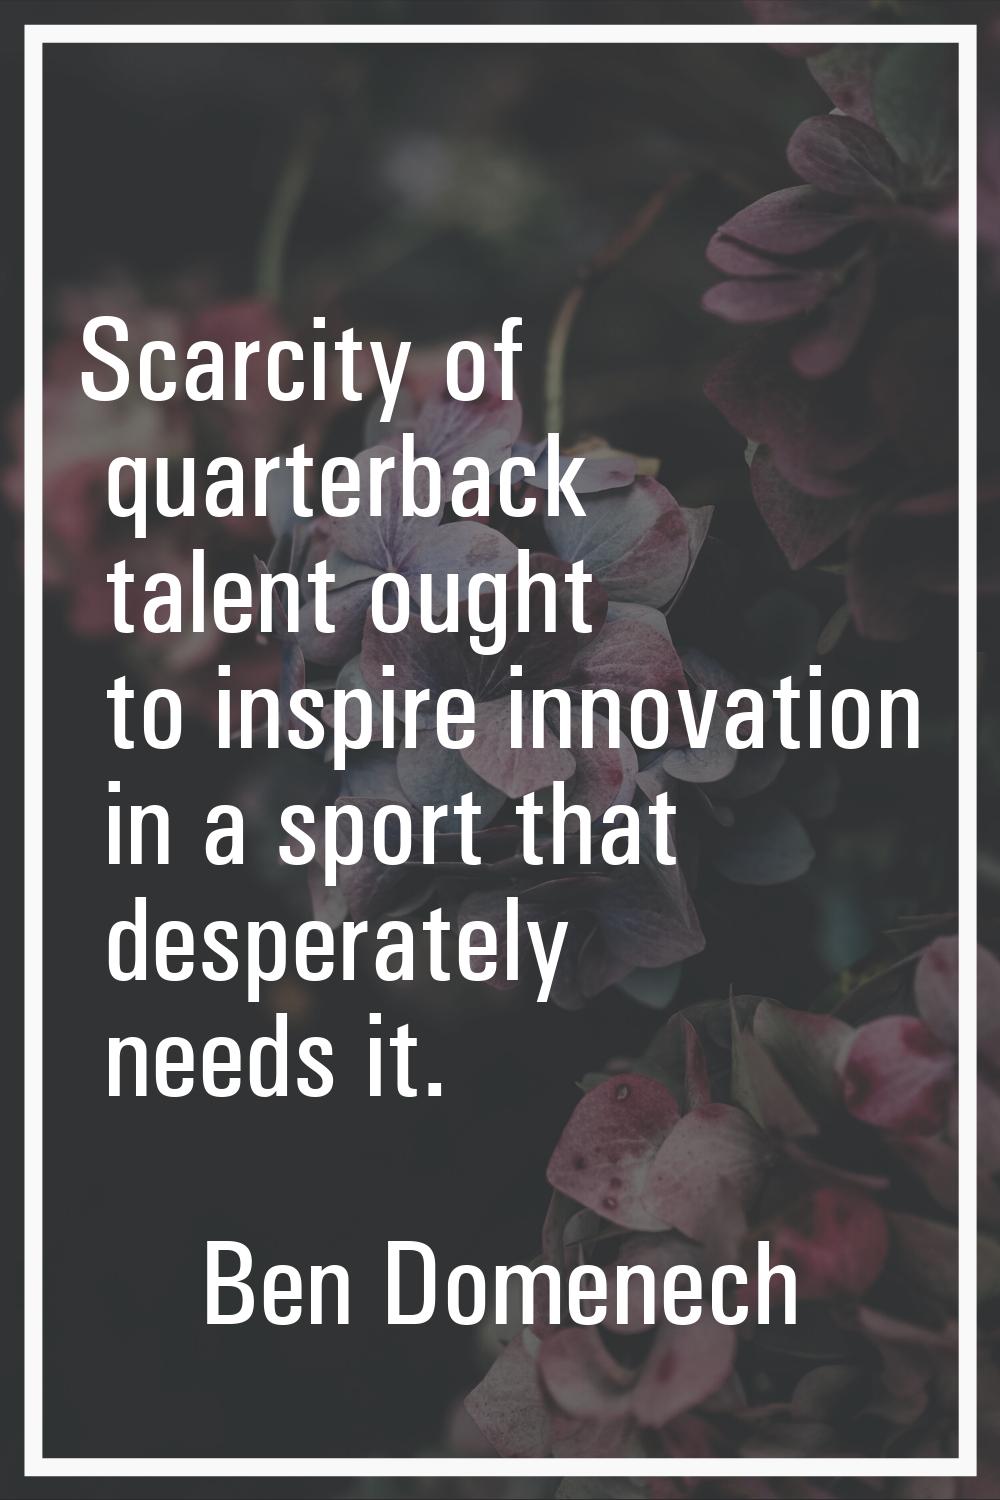 Scarcity of quarterback talent ought to inspire innovation in a sport that desperately needs it.